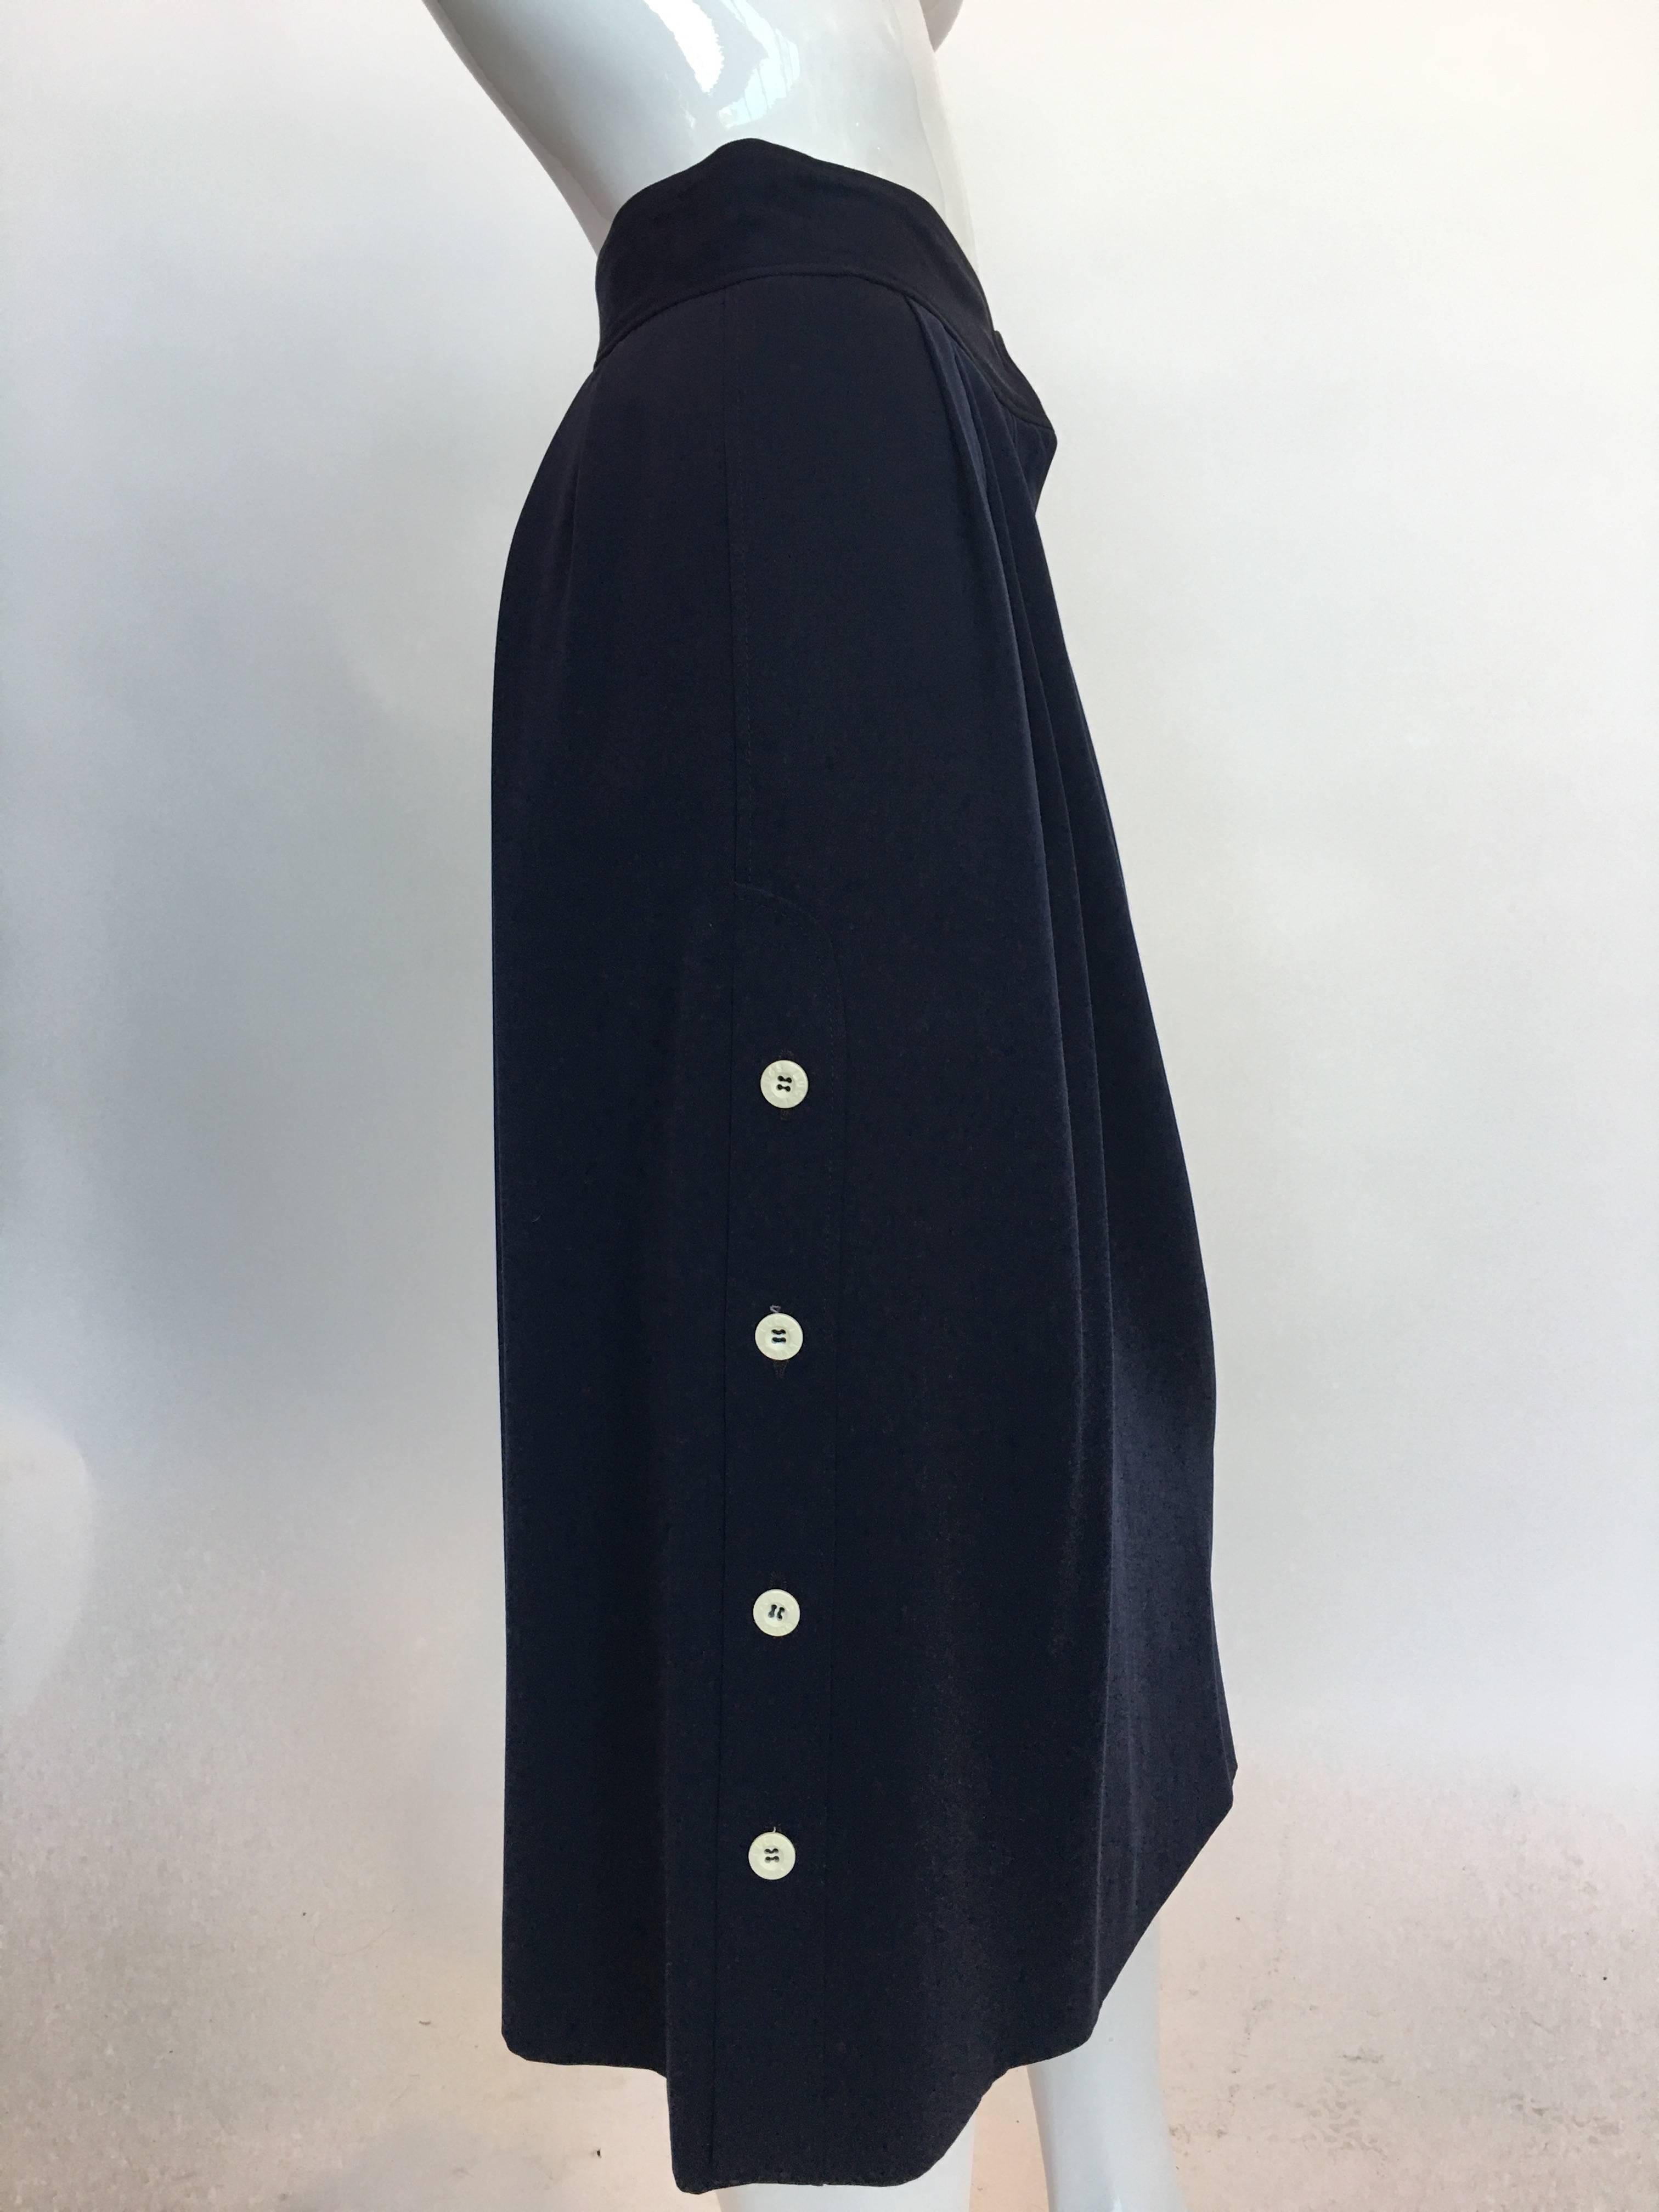 Gucci 1970's Navy Wool Pleated Skirt with buttons up sides.

Waist: 13.5"
Length:
From V front - 28"
Back -  29.5"

Good Vintage Condition:Please remember all clothes are previously owned and gently worn unless otherwise noted.  ALL